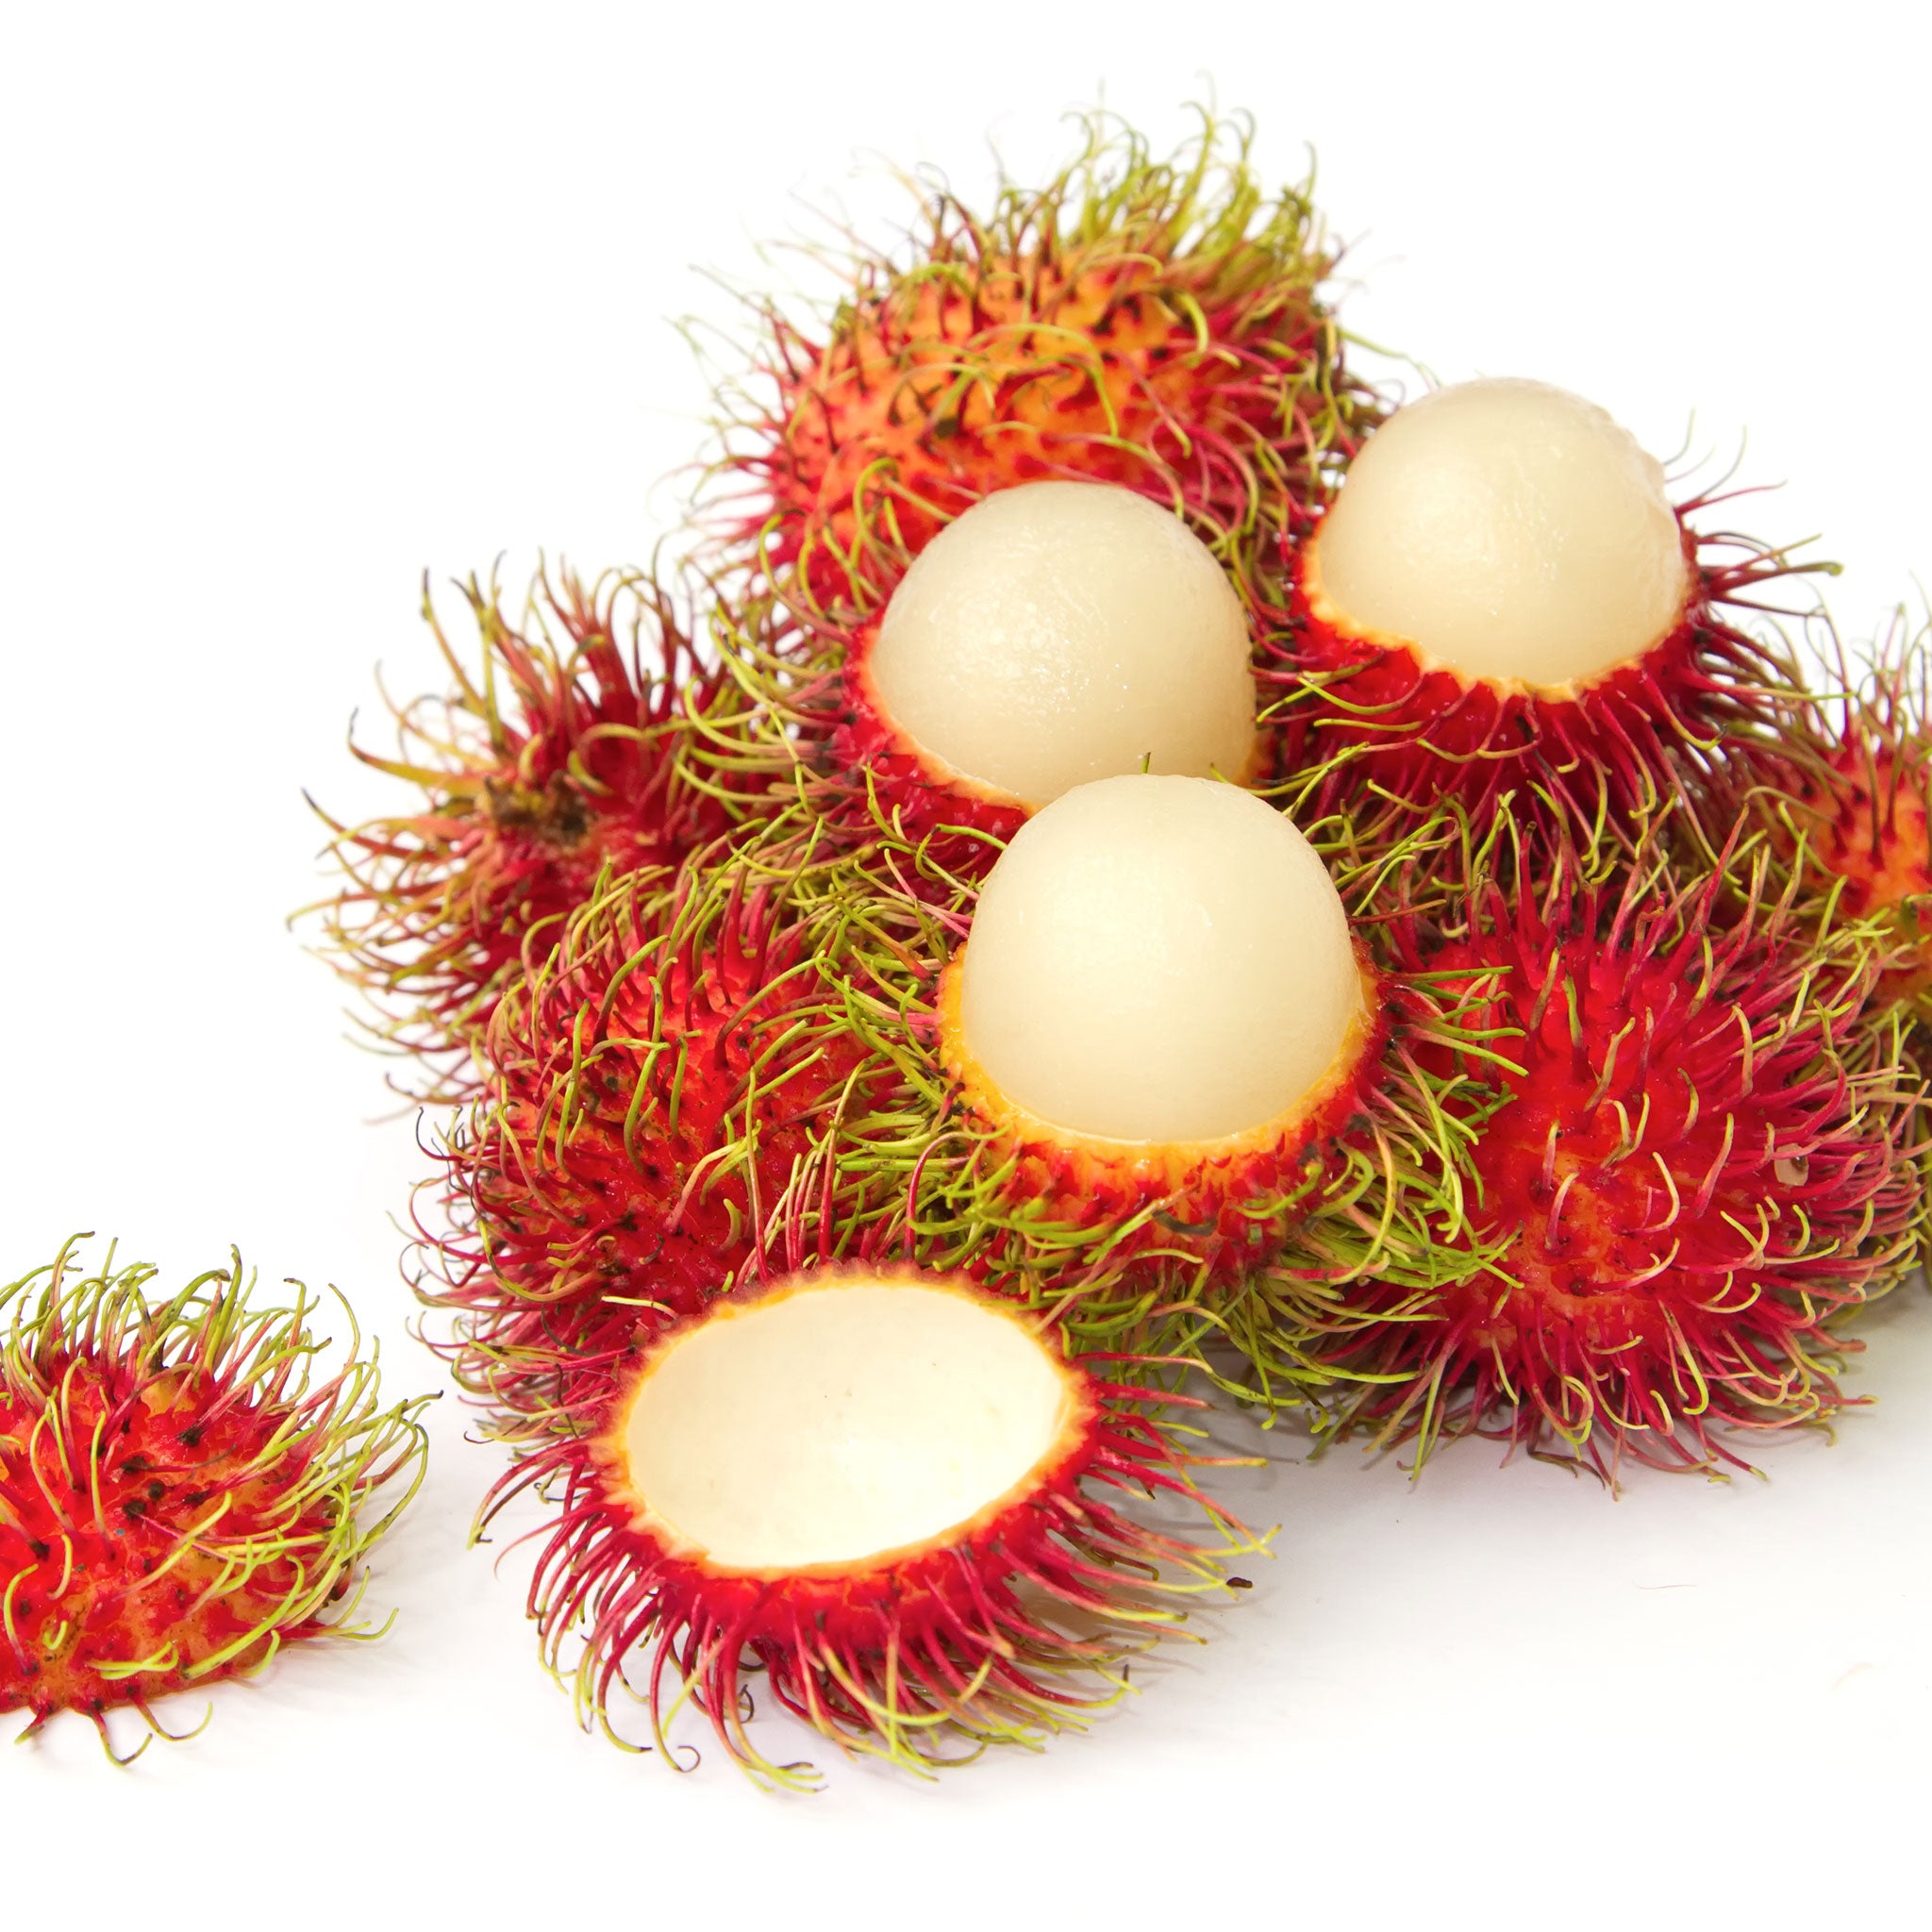 Fresh Thai Rambutan Fruit (Ngok) about 500g - Imported Weekly from Thailand